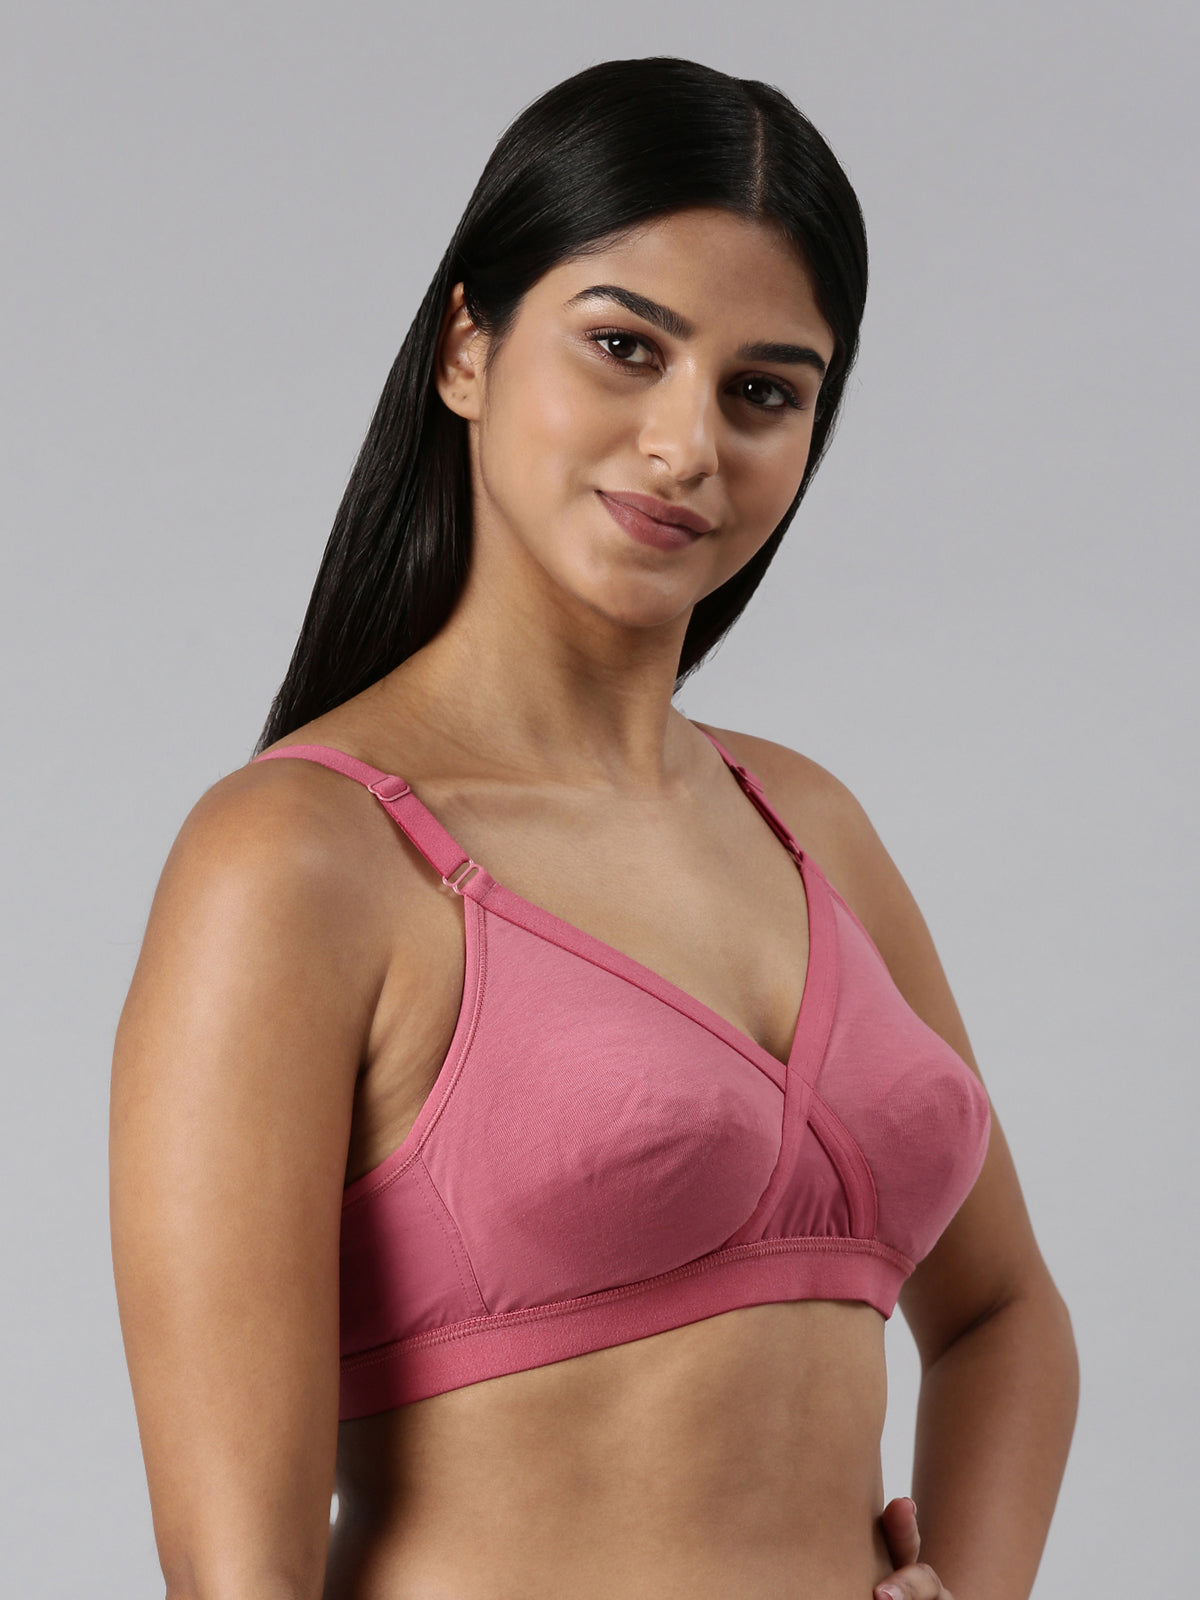 blossom-cotton cross-rose gold4-Woven knitted-support bra